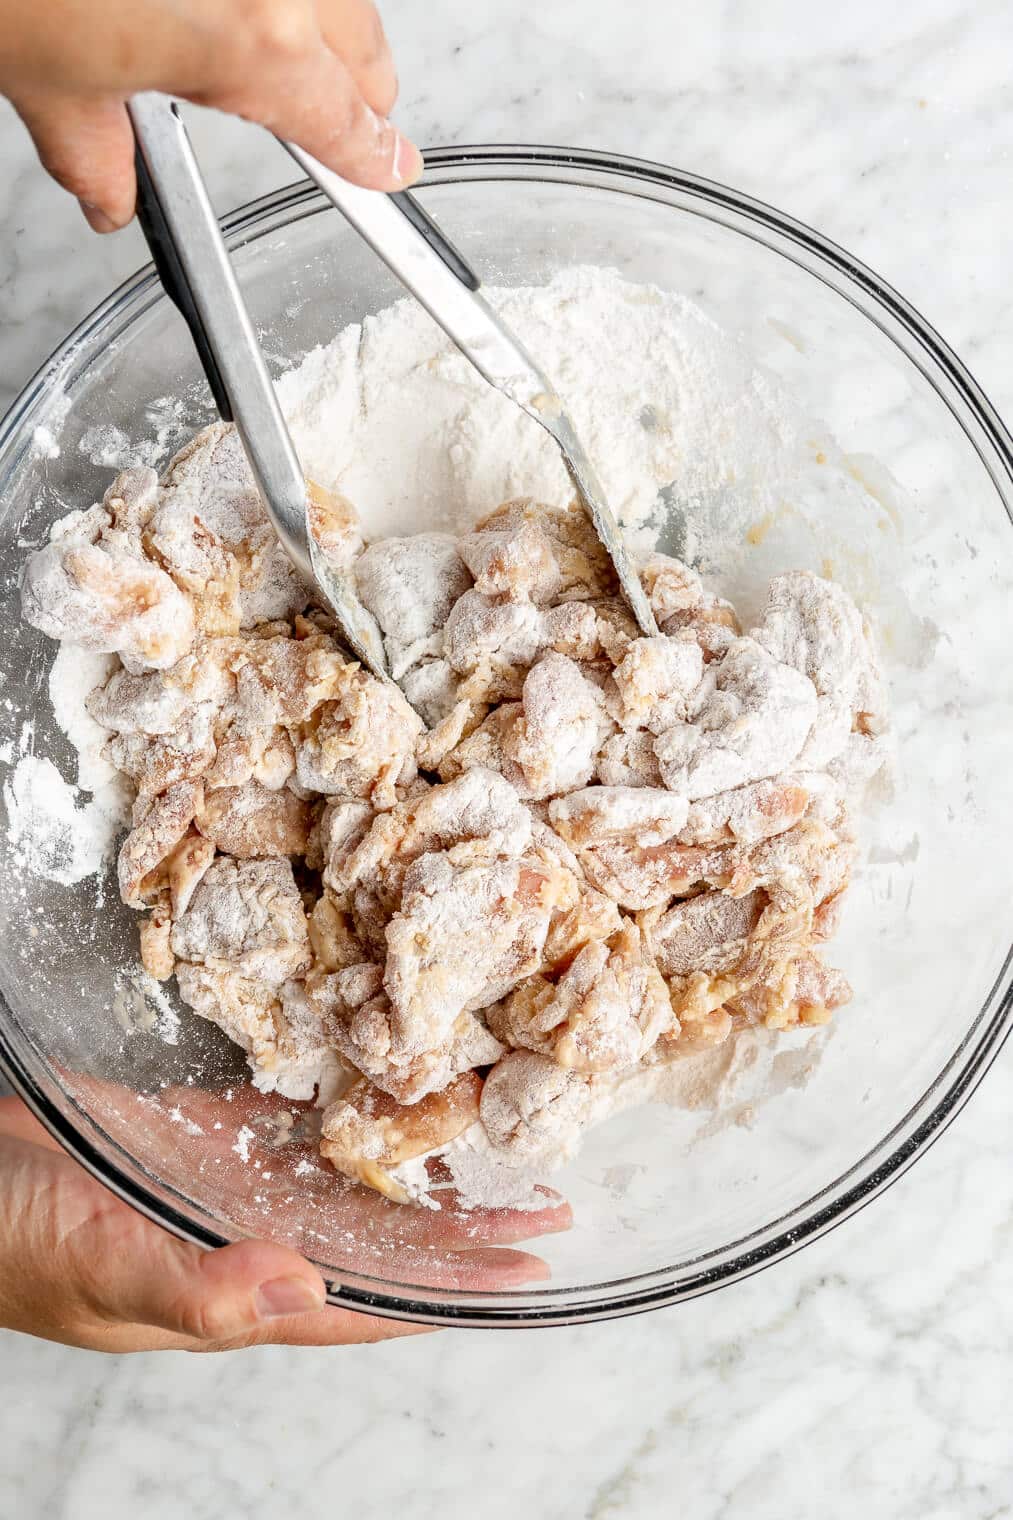 A person using tongs to coat small chunks of raw chicken thighs to a large glass mixing bowl of arrowroot starch, white rice flour, and salt.